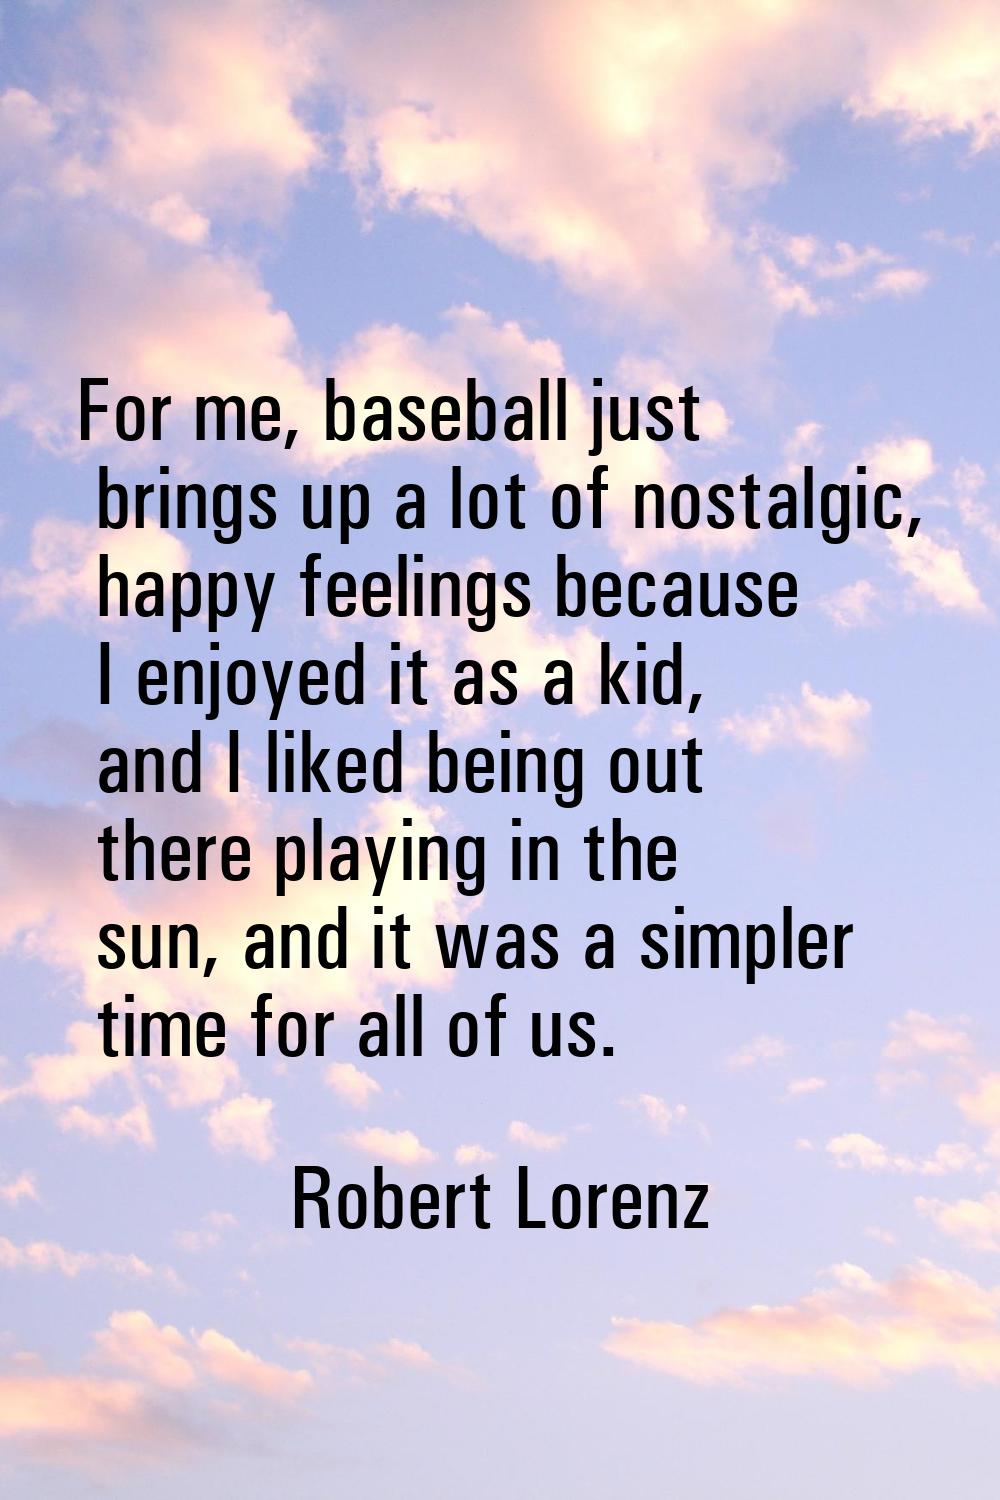 For me, baseball just brings up a lot of nostalgic, happy feelings because I enjoyed it as a kid, a